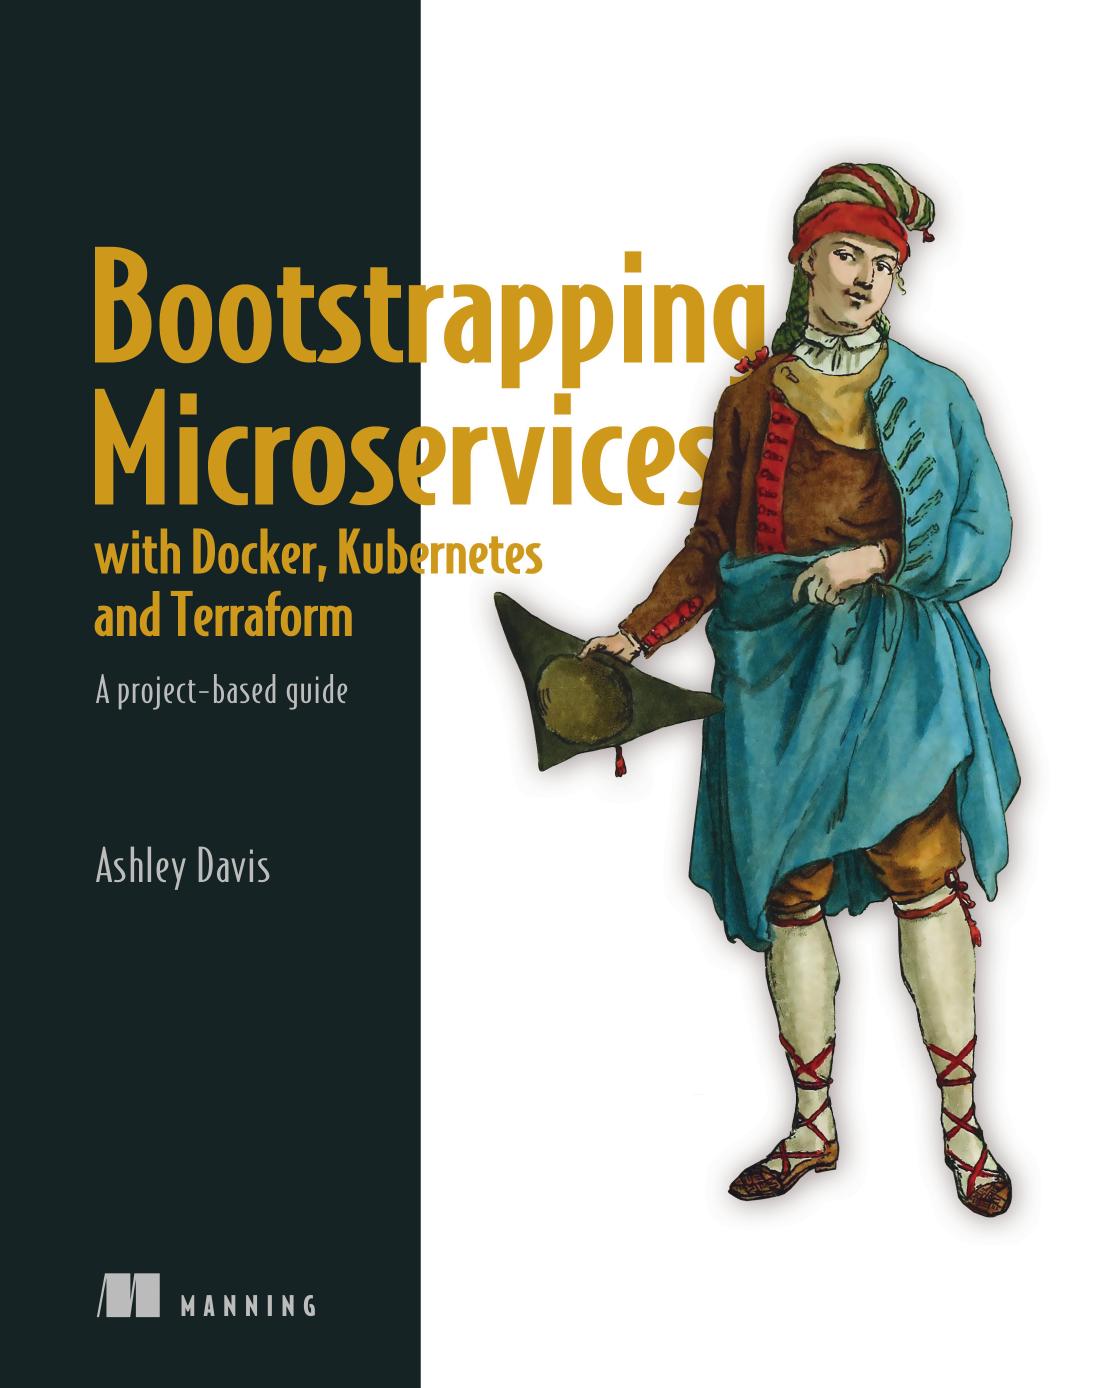 Bootstrapping Microservices With Docker, Kubernetes, and Terraform: A Project-Based Guide